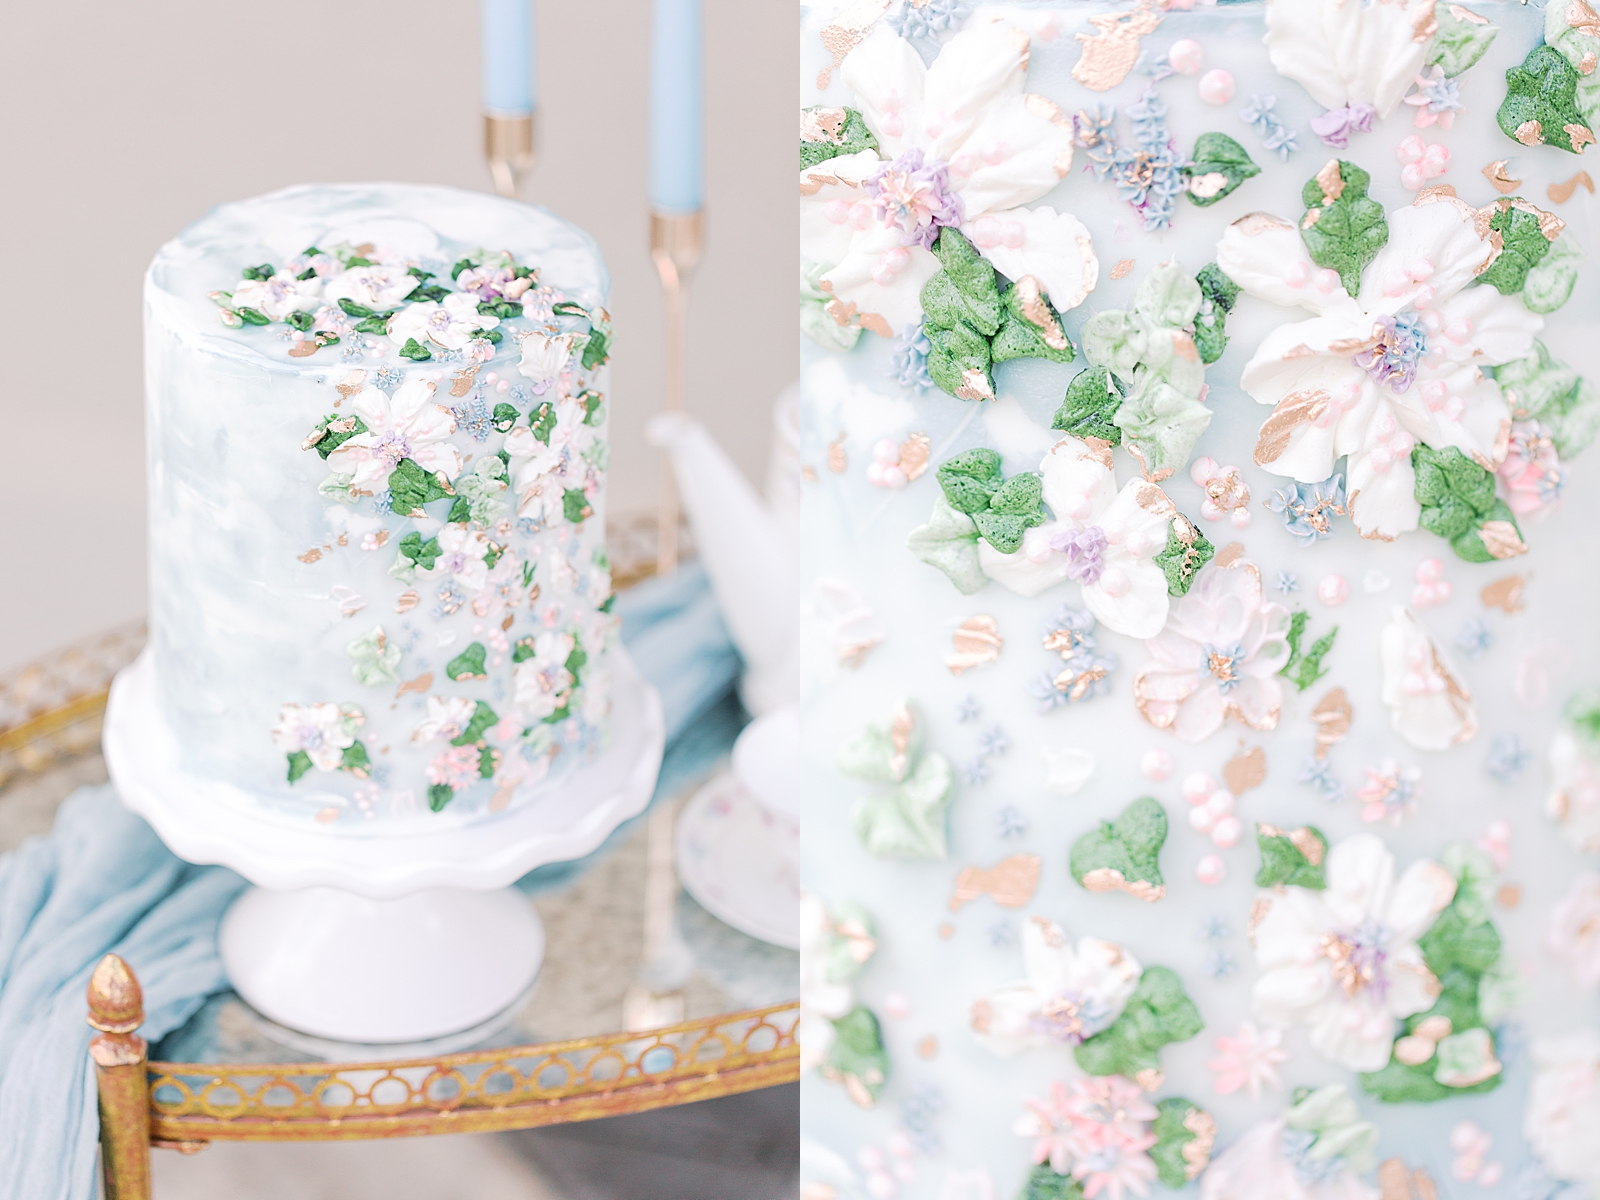 Chateau Elan Blue Cake with buttercream flowers Photos